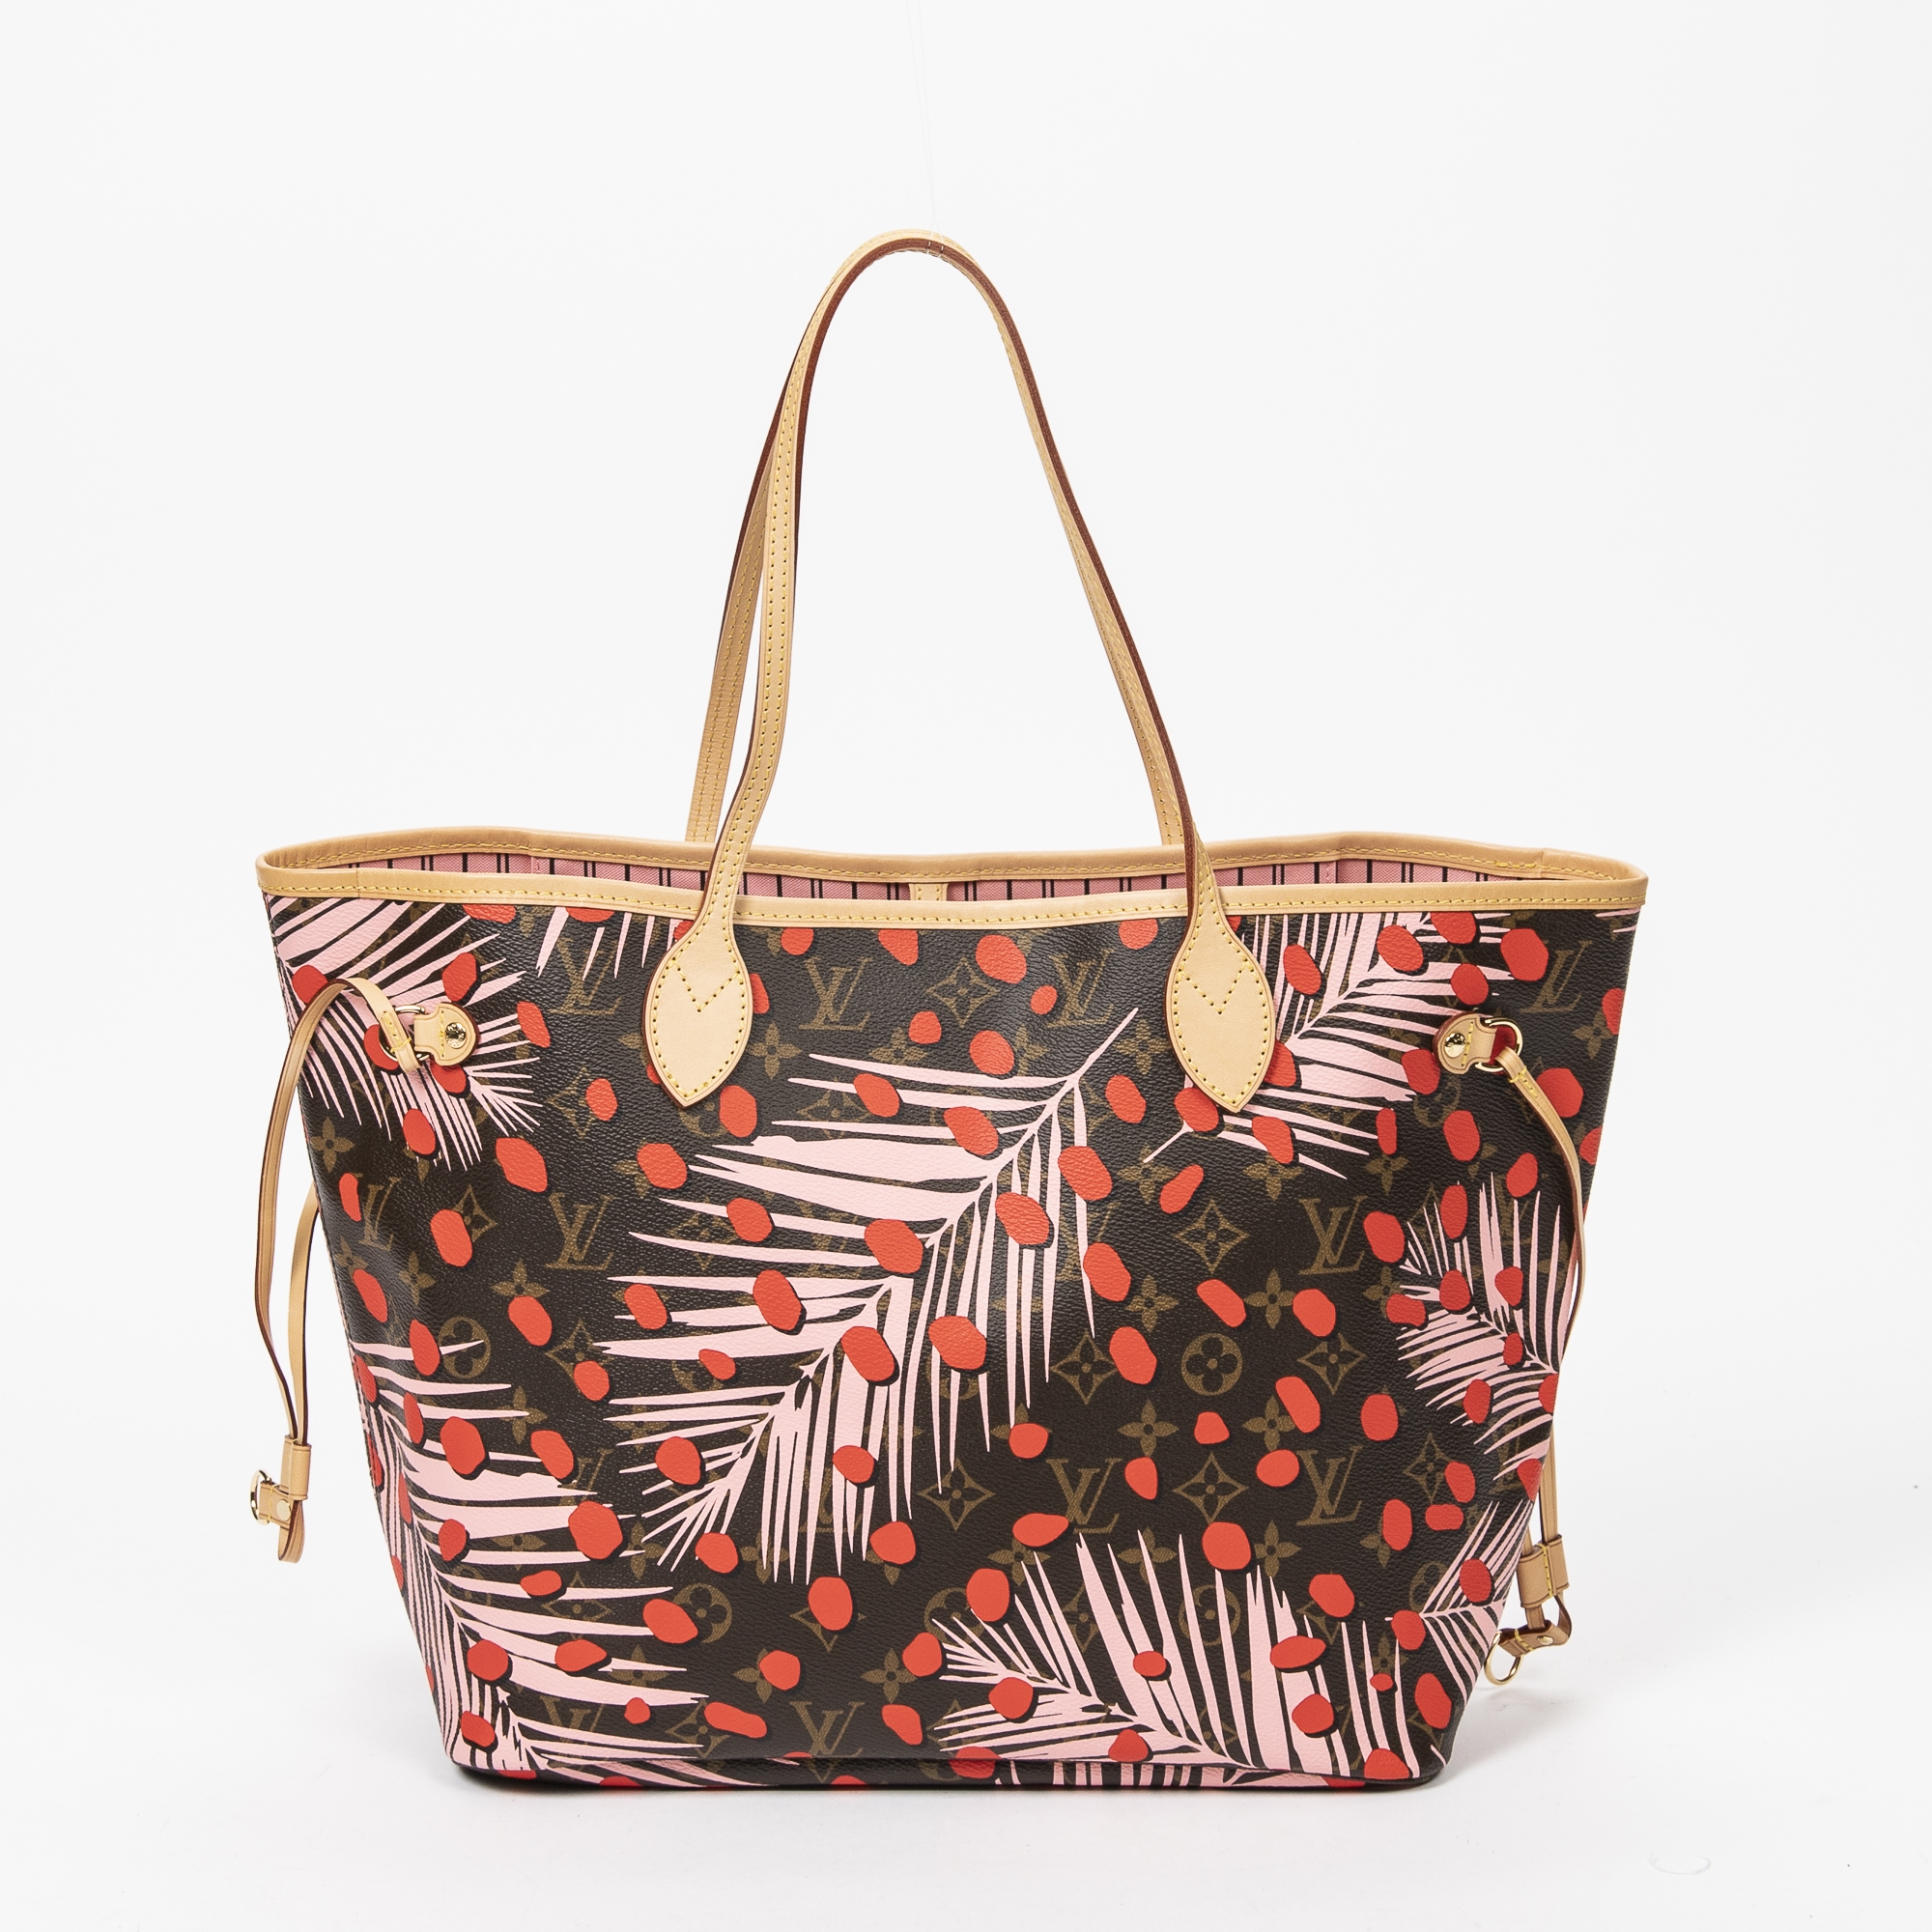 Sold at Auction: Louis Vuitton New Jungle Neverfull Leather Tote